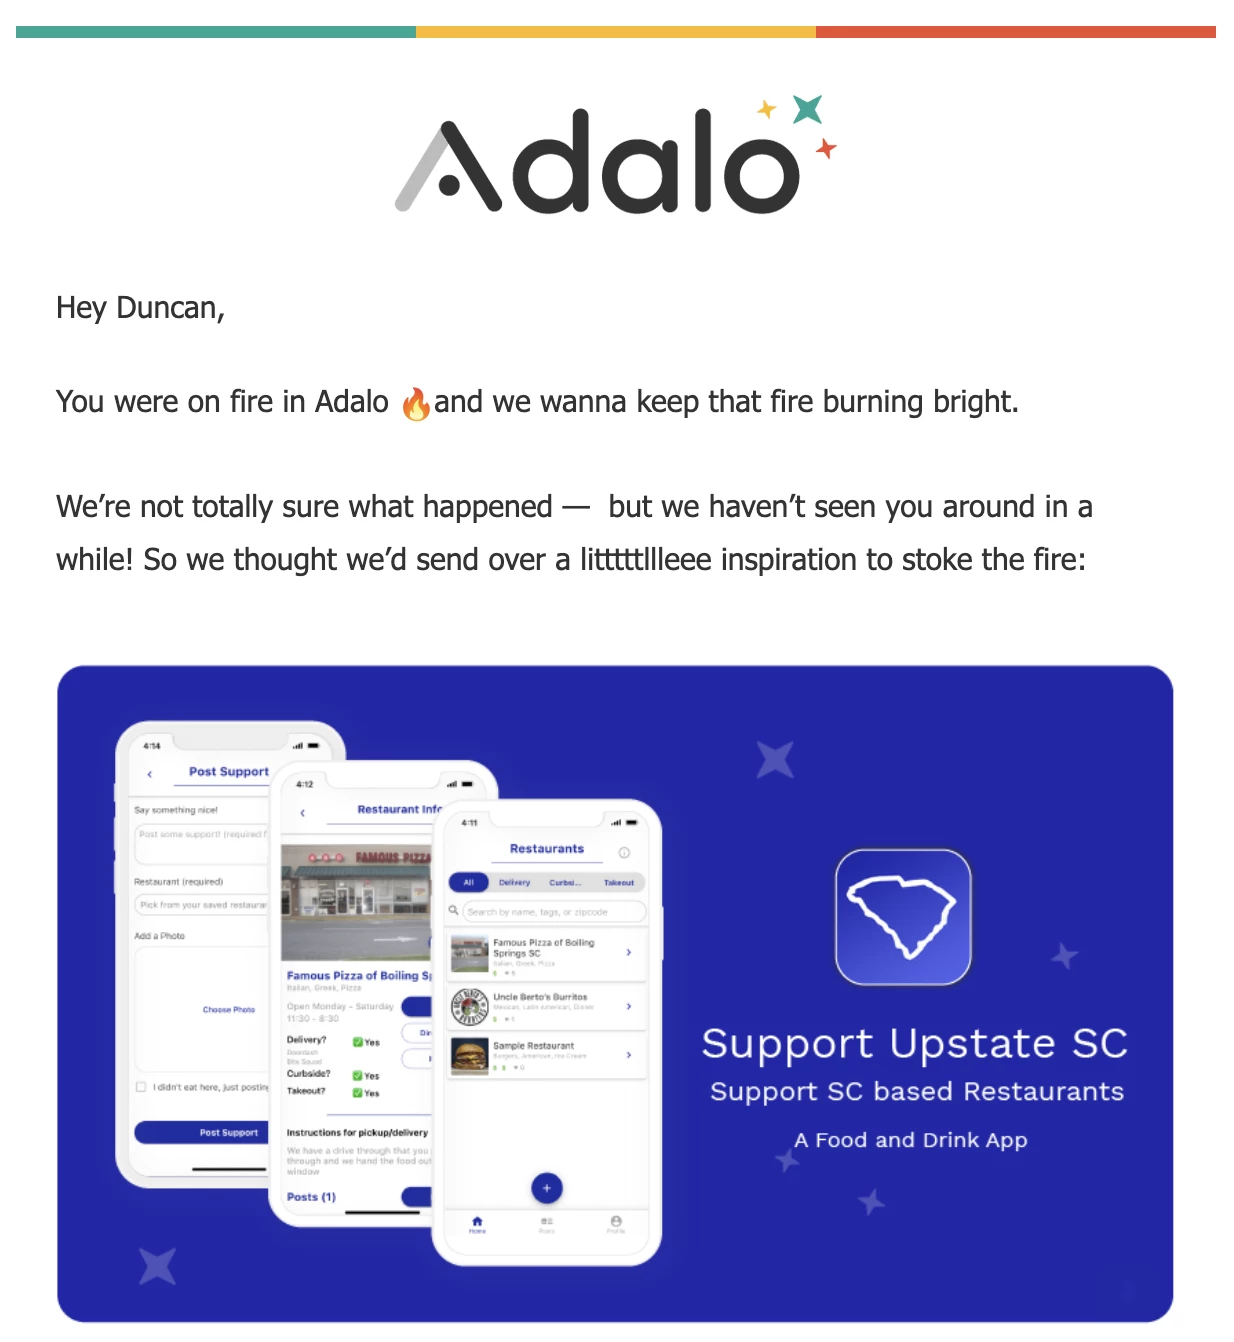 Adalo re-engagement email